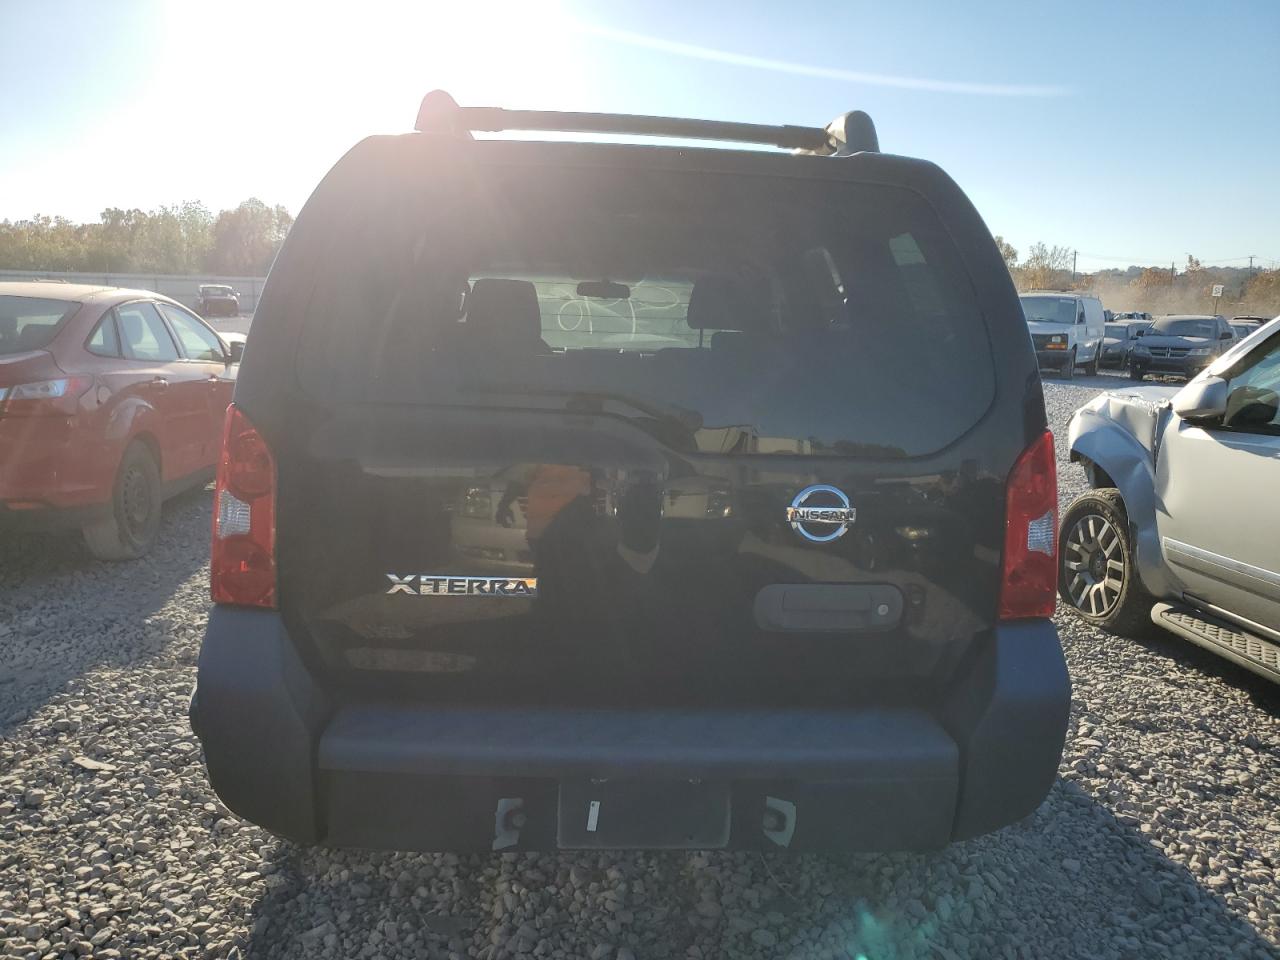 5N1AN08U07C****** Salvage and Repairable 2007 Nissan Xterra in Alabama State